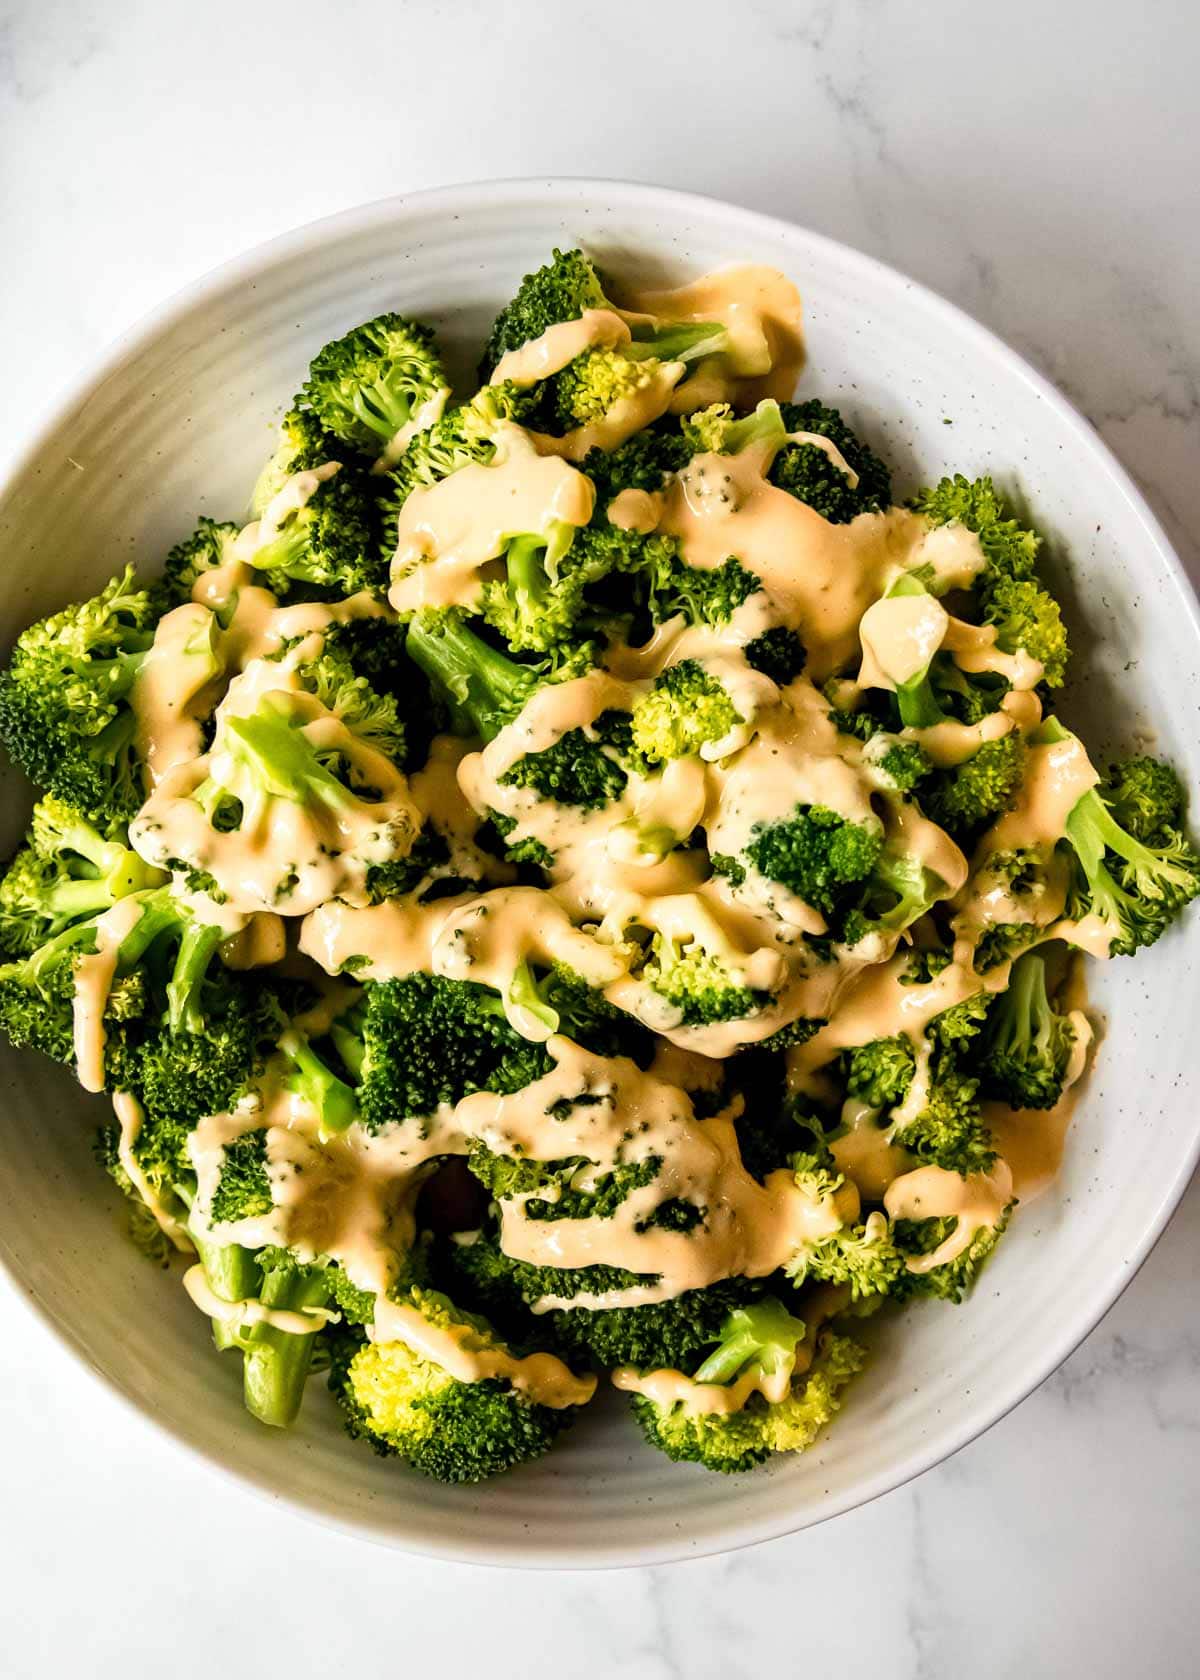 a plate full of broccoli and cheese sauce